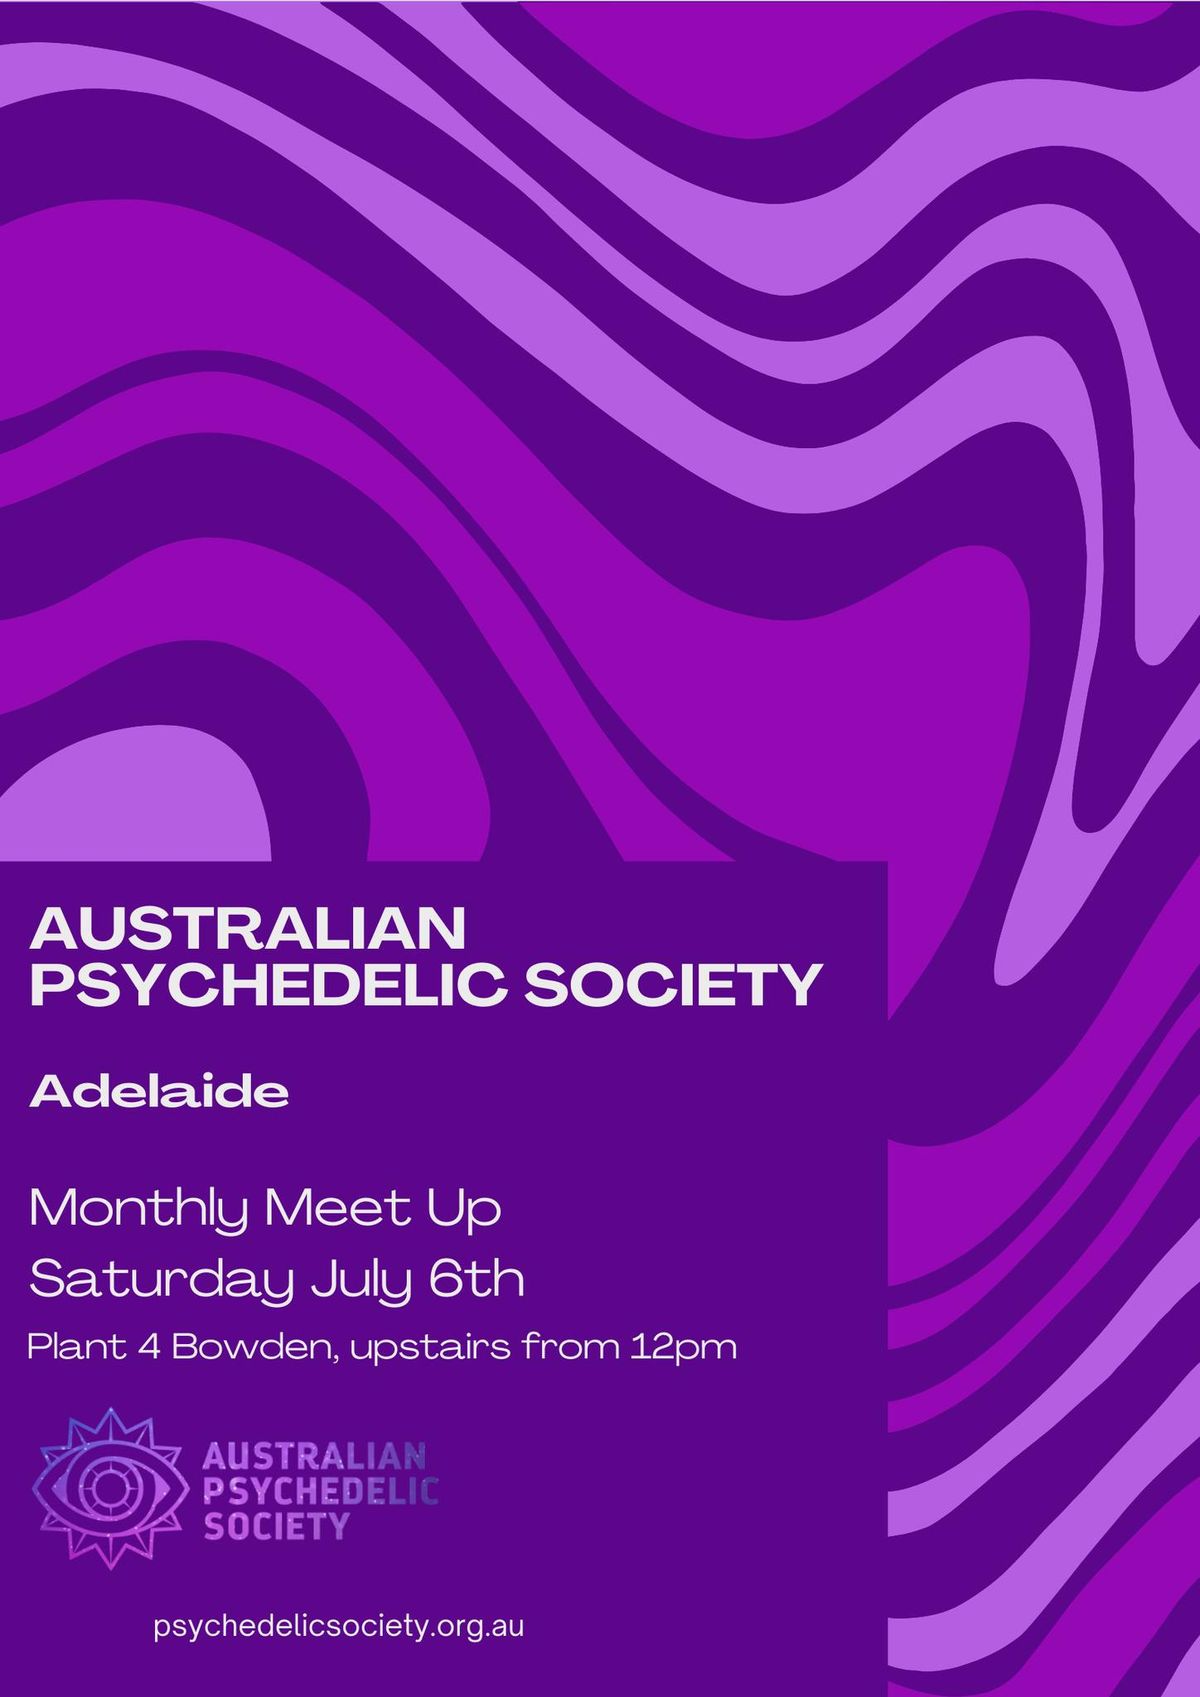 APS - Adelaide Psychedelic Stories Meet Up 